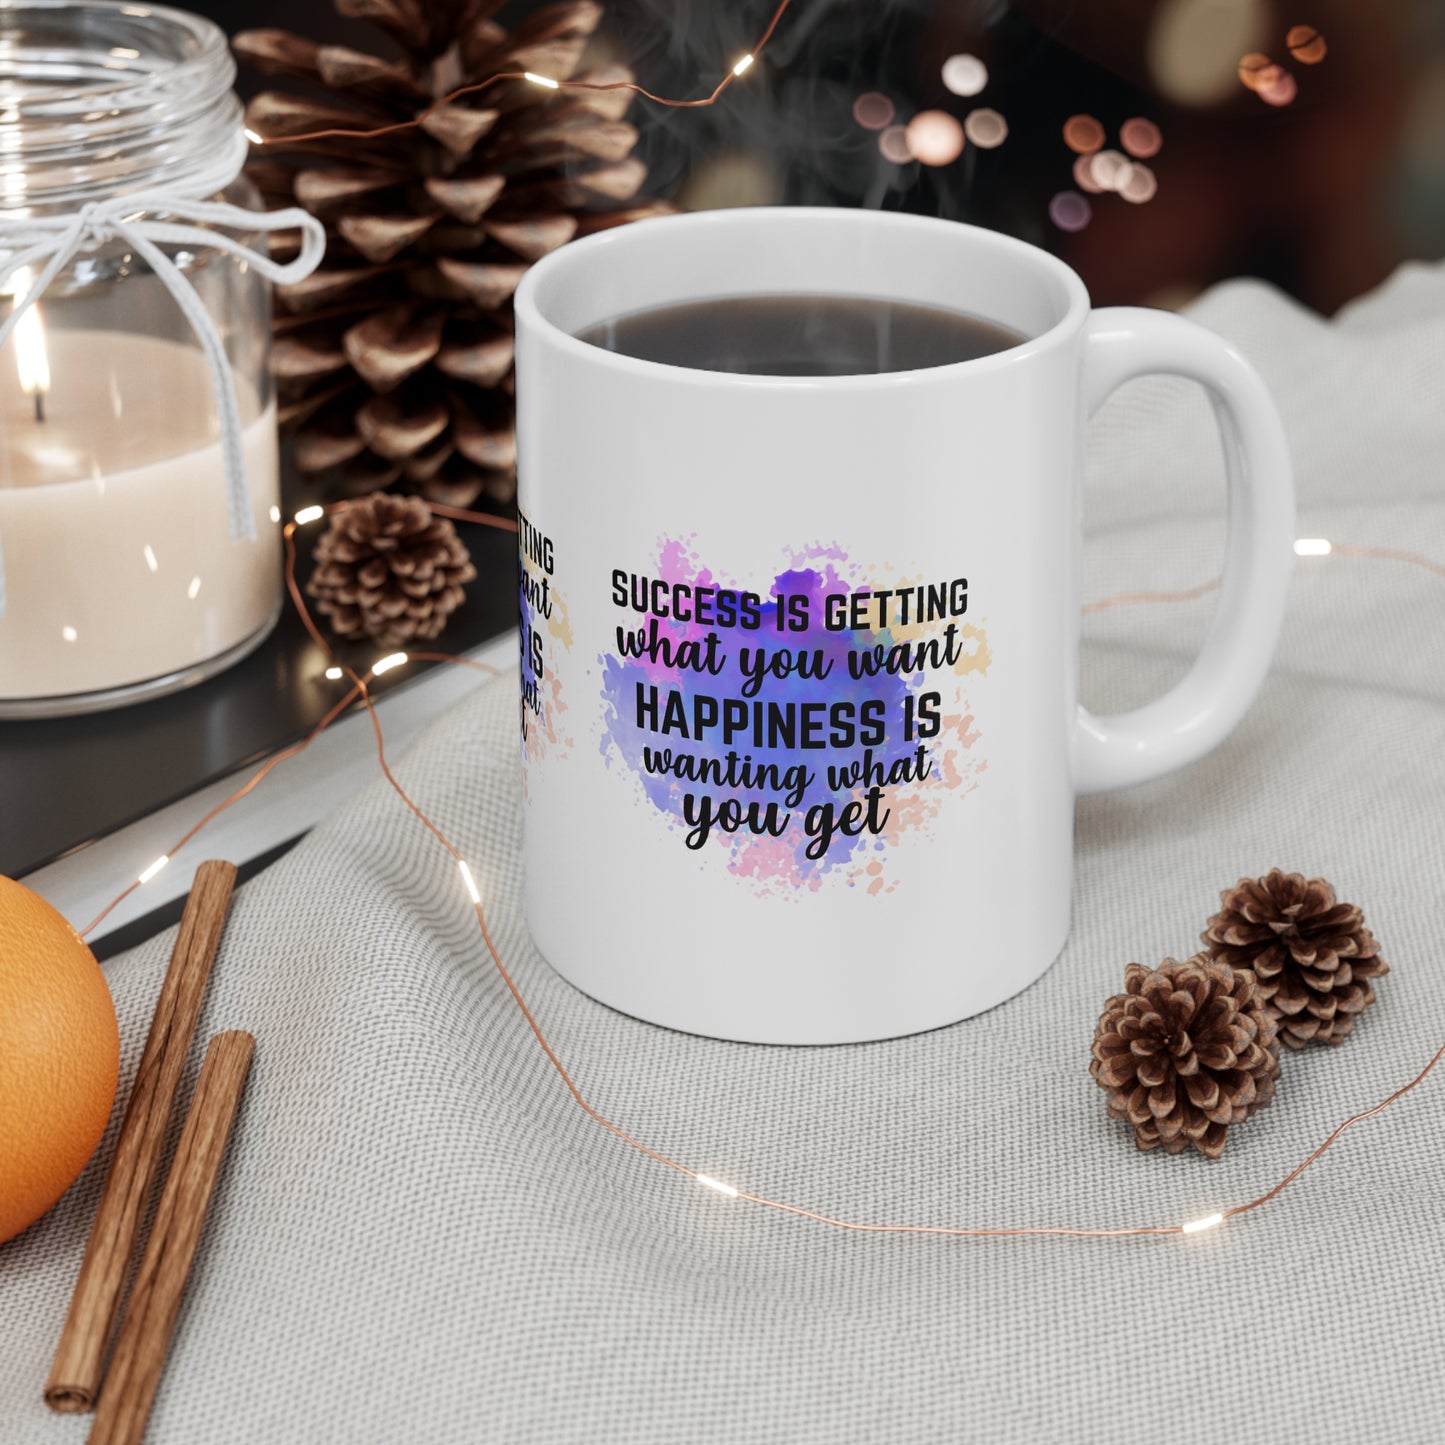 "SUCCESS is getting what you want. HAPINESS is wanting what you get" Inspirational Mug - MUGSCITY - Free Shipping.